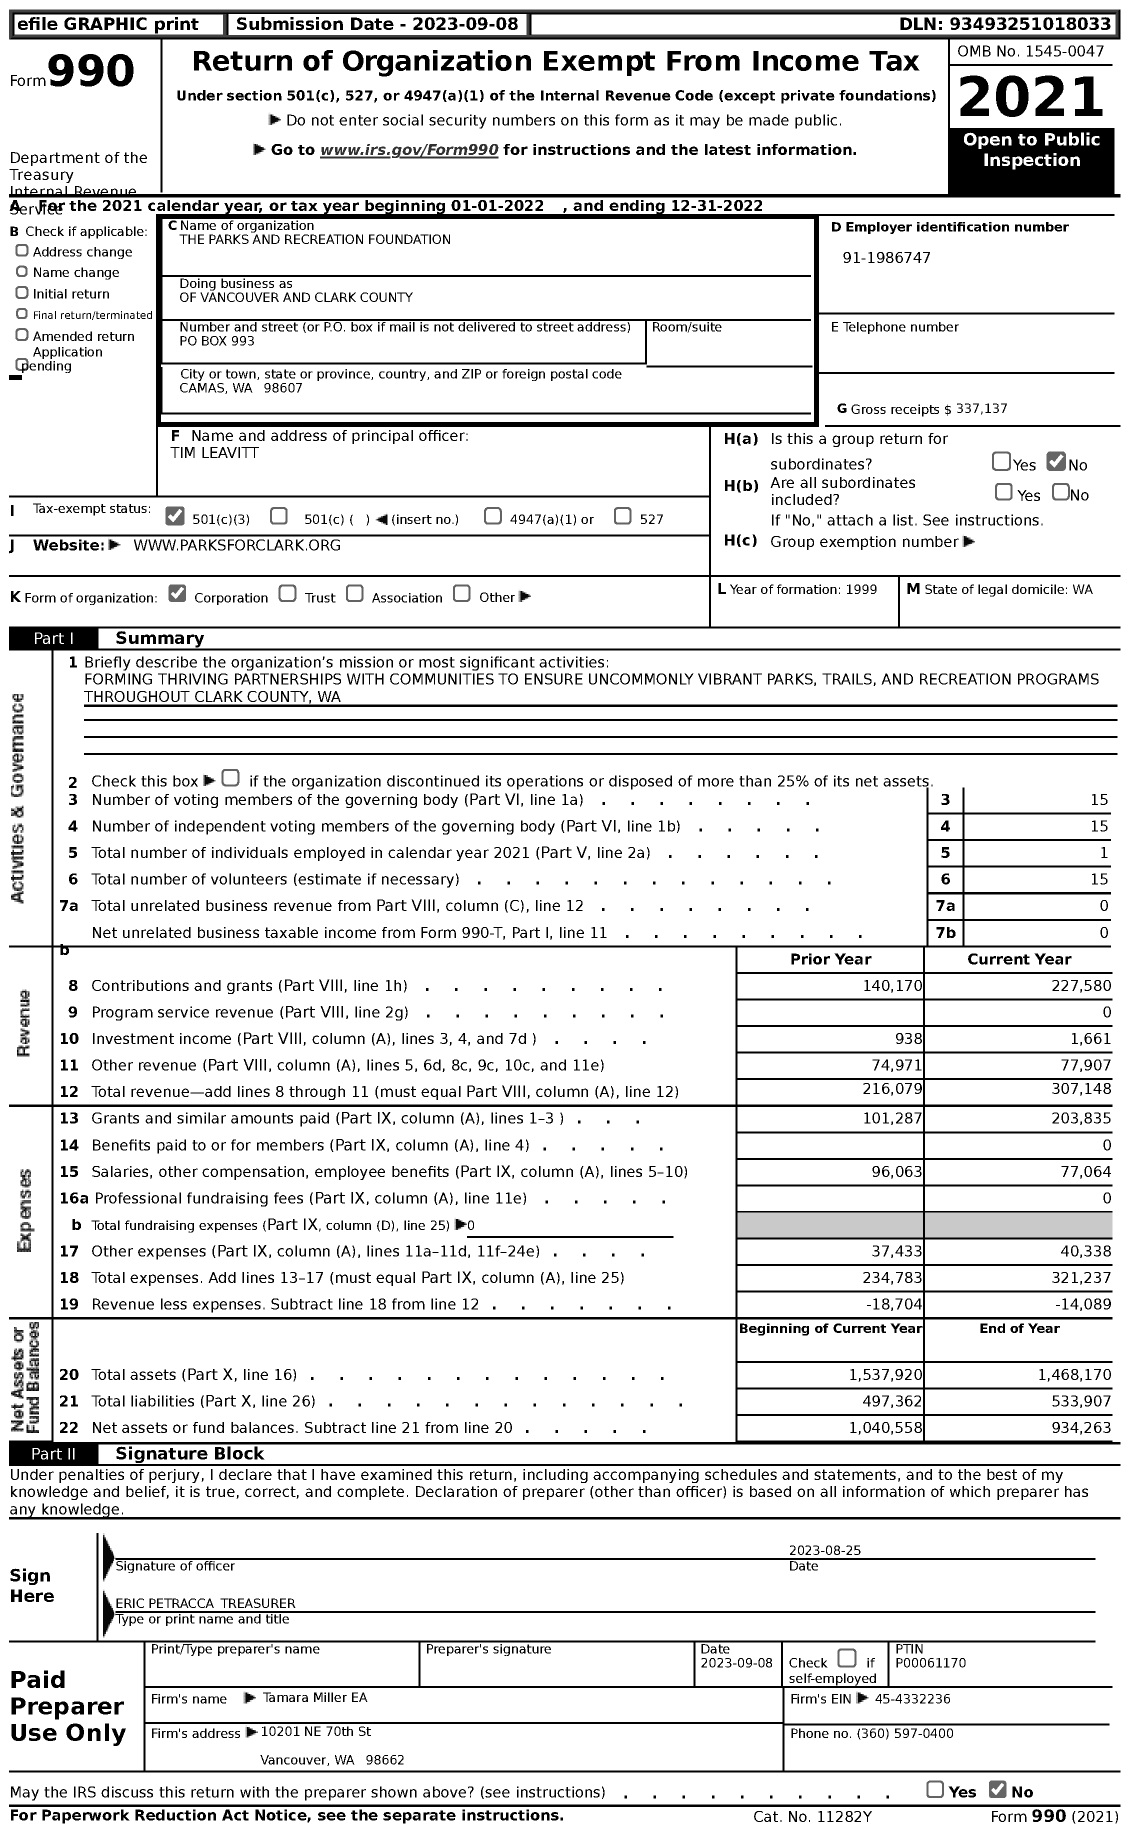 Image of first page of 2022 Form 990 for The Parks and Recreation Foundation of Vancouver and Clark County